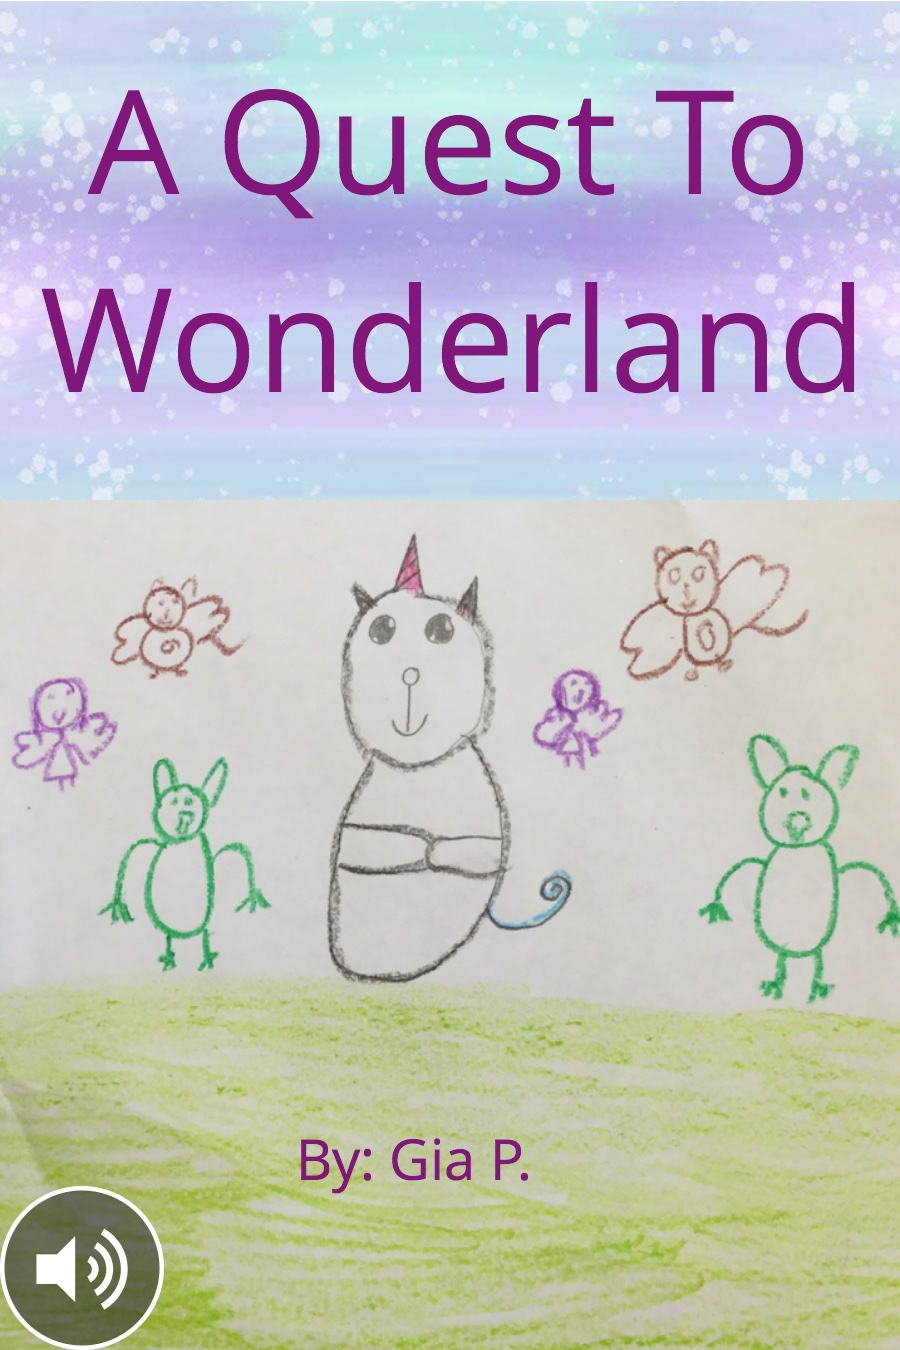 A Quest To Wonderland by Gia P